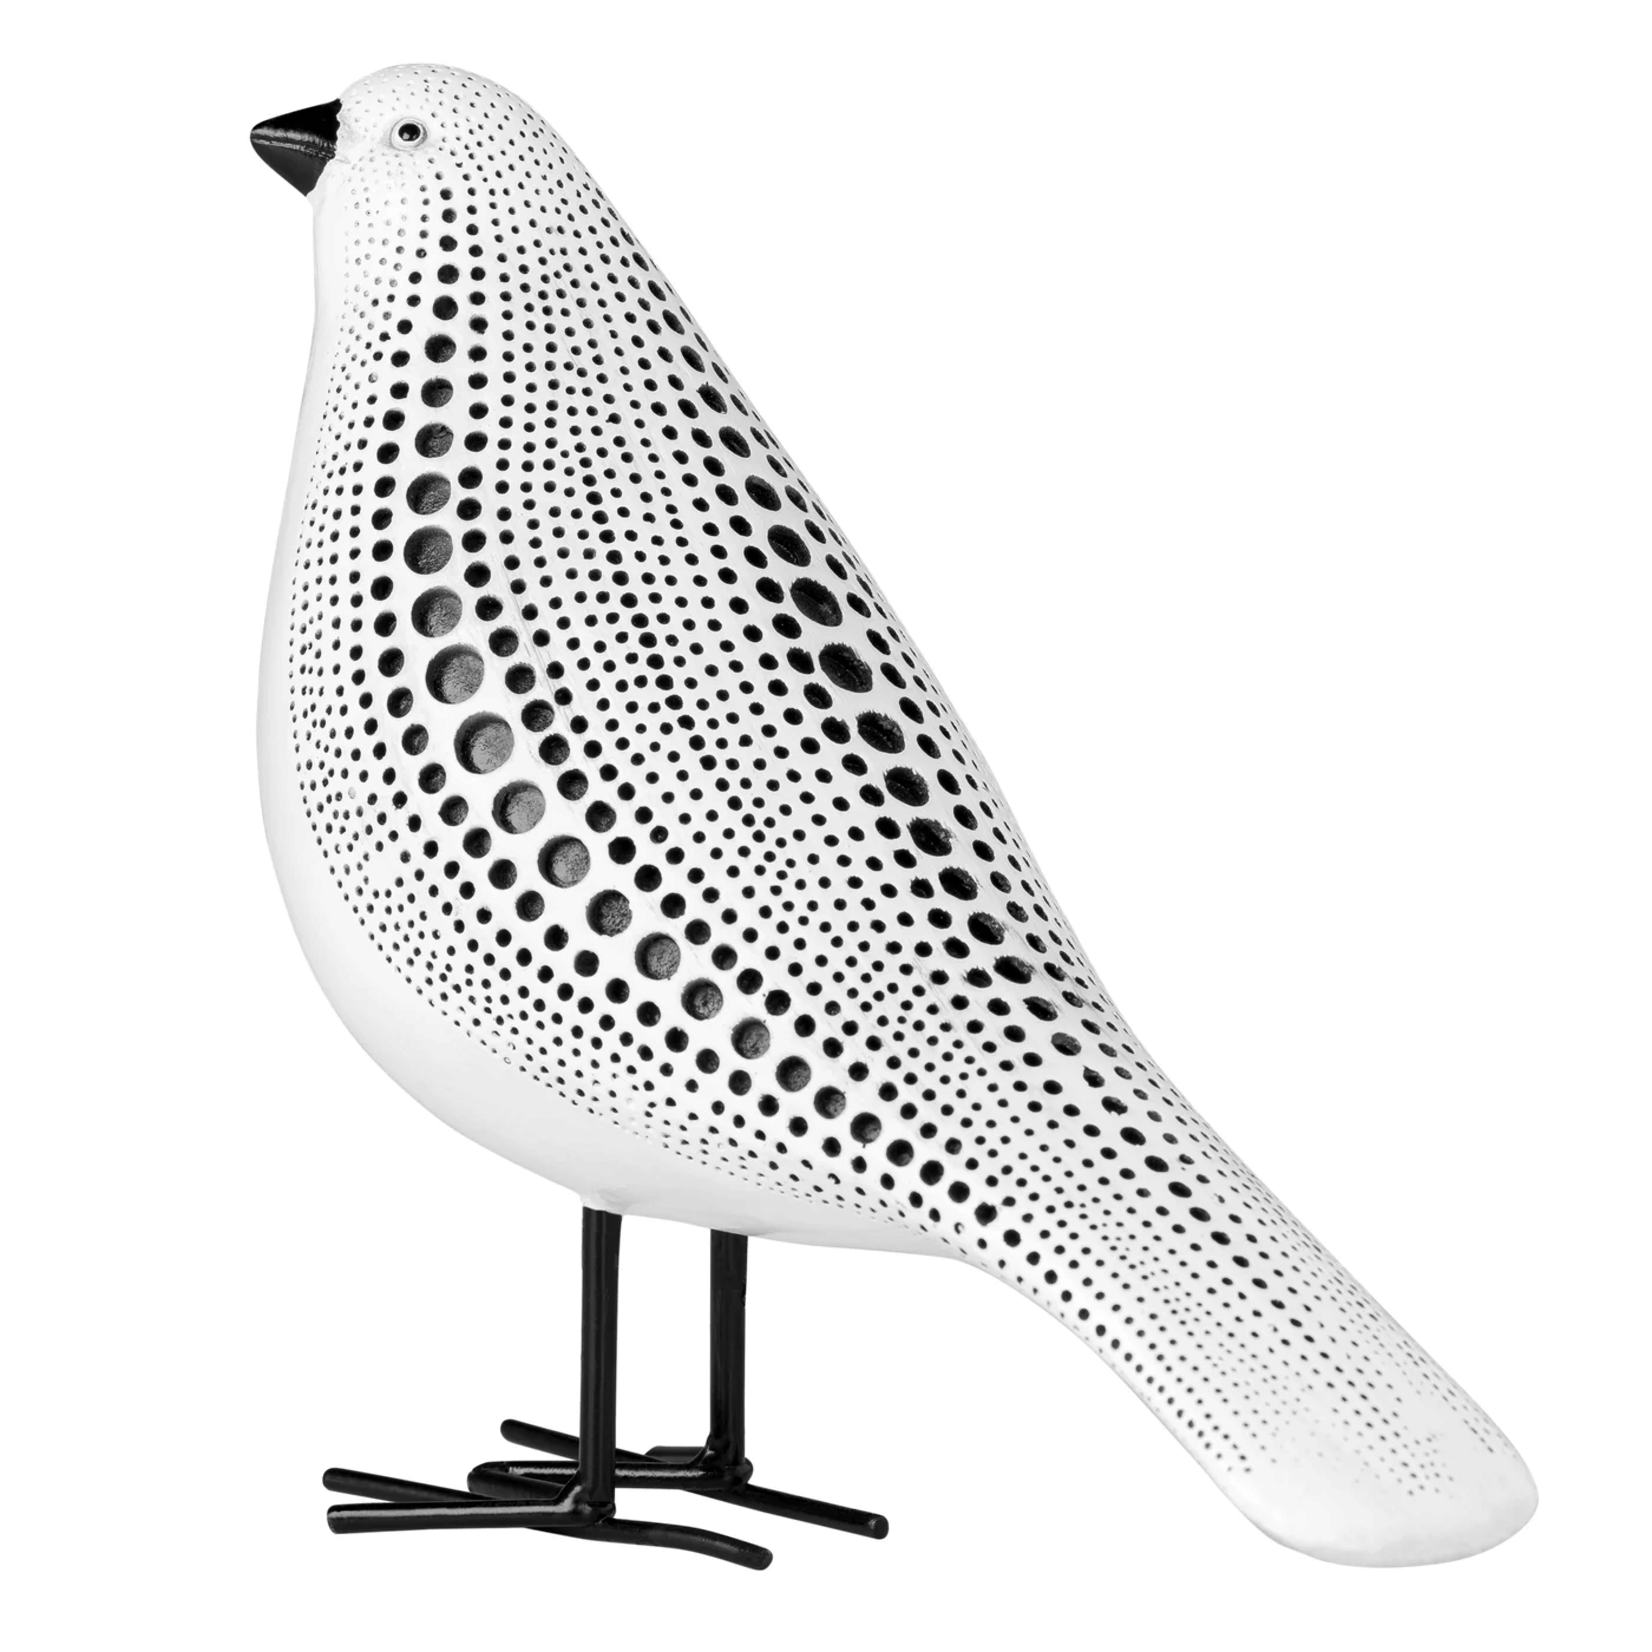 Torre & Tagus Dotted Standing  Bird - White